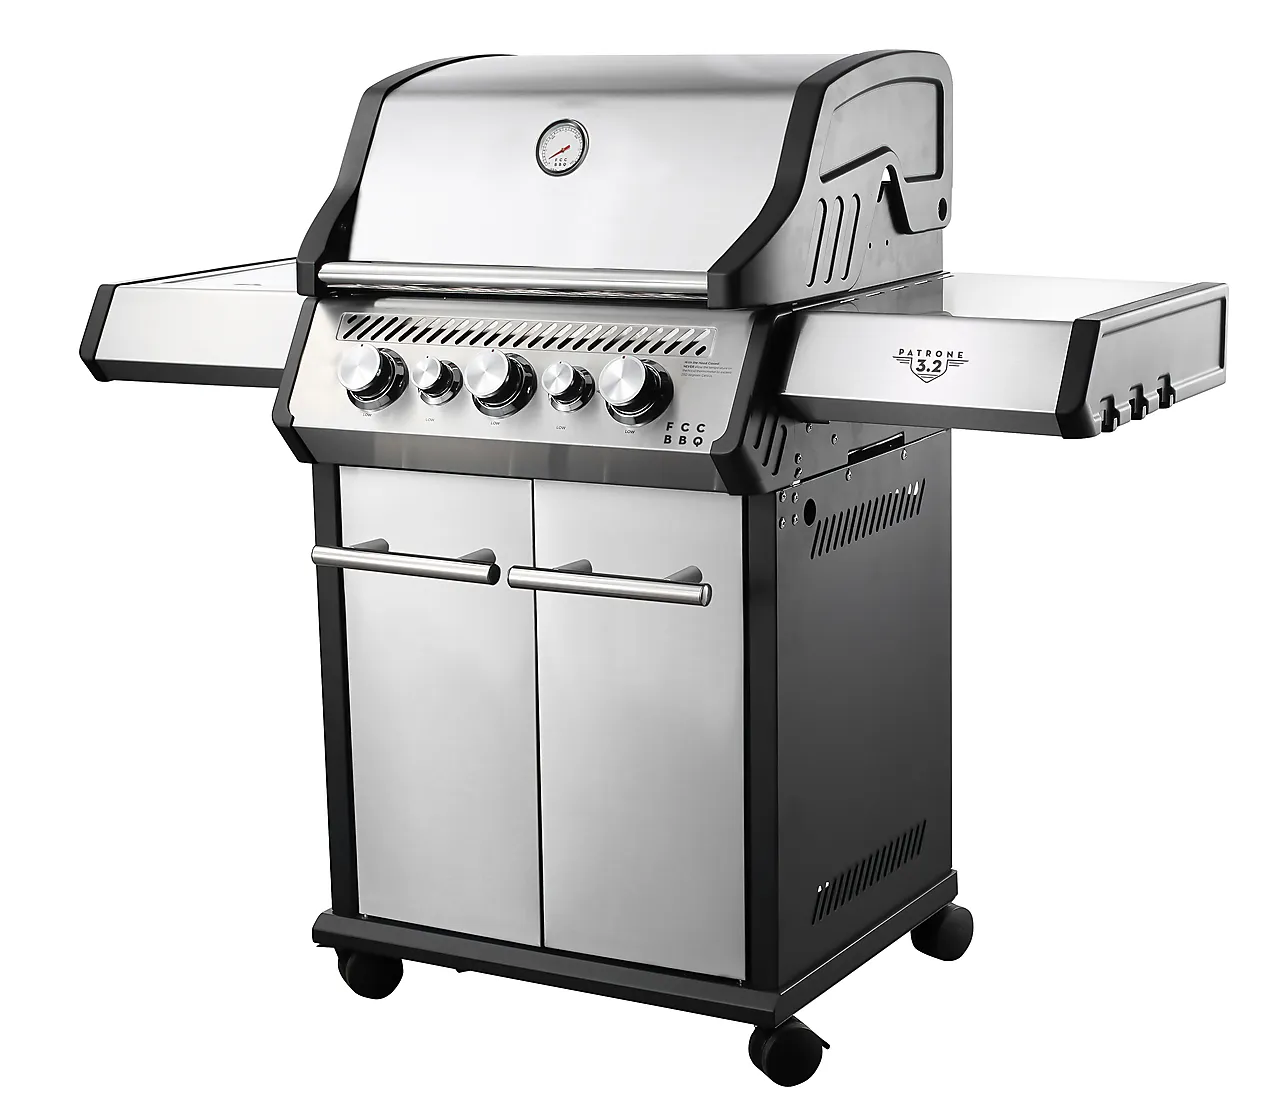 Gassgrill Patrone 3.2 null - null - 2